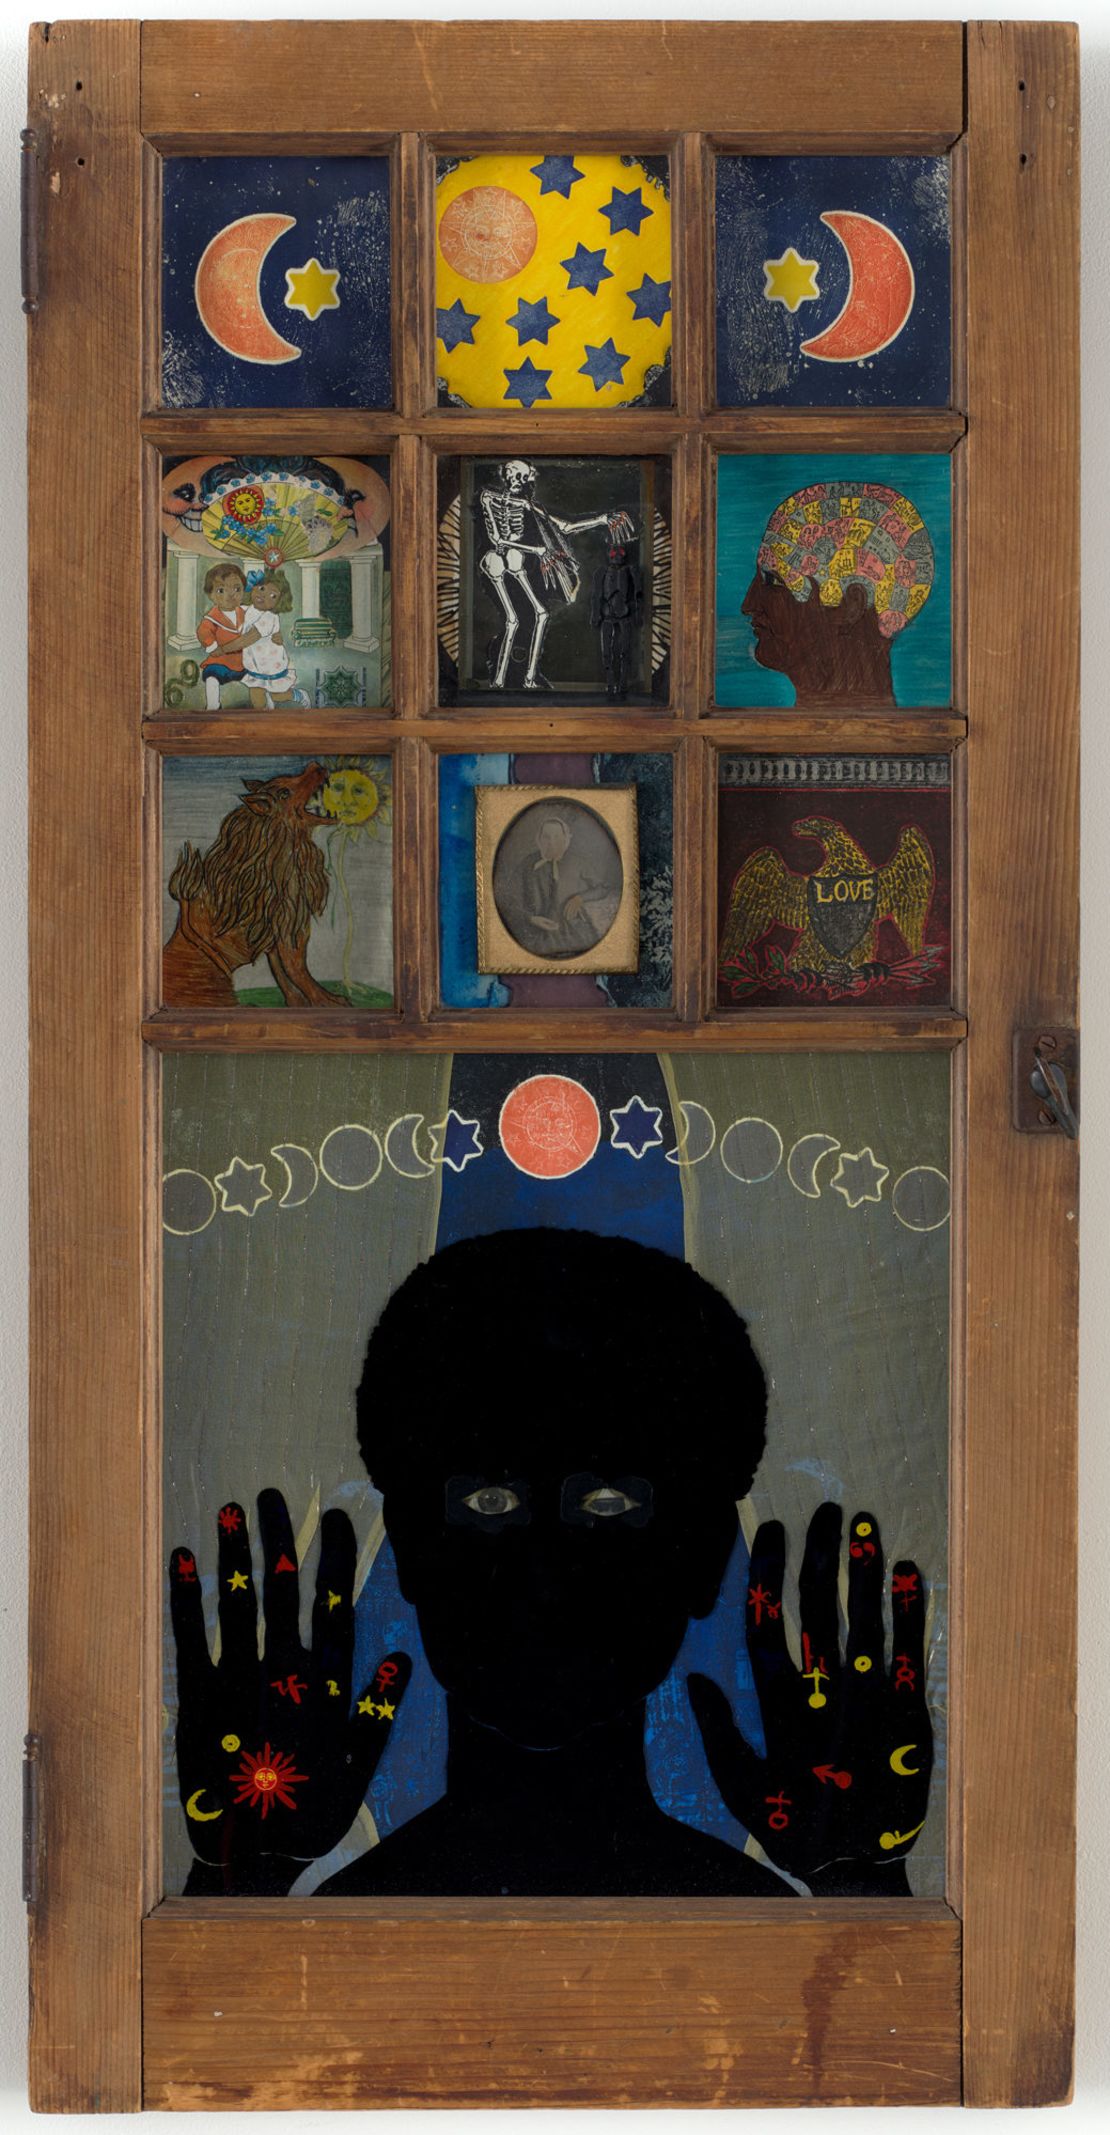 The exhibition "Betye Saar: The Legends of Black Girl's Window" will feature Saar's iconic assemblage alongside her early prints.